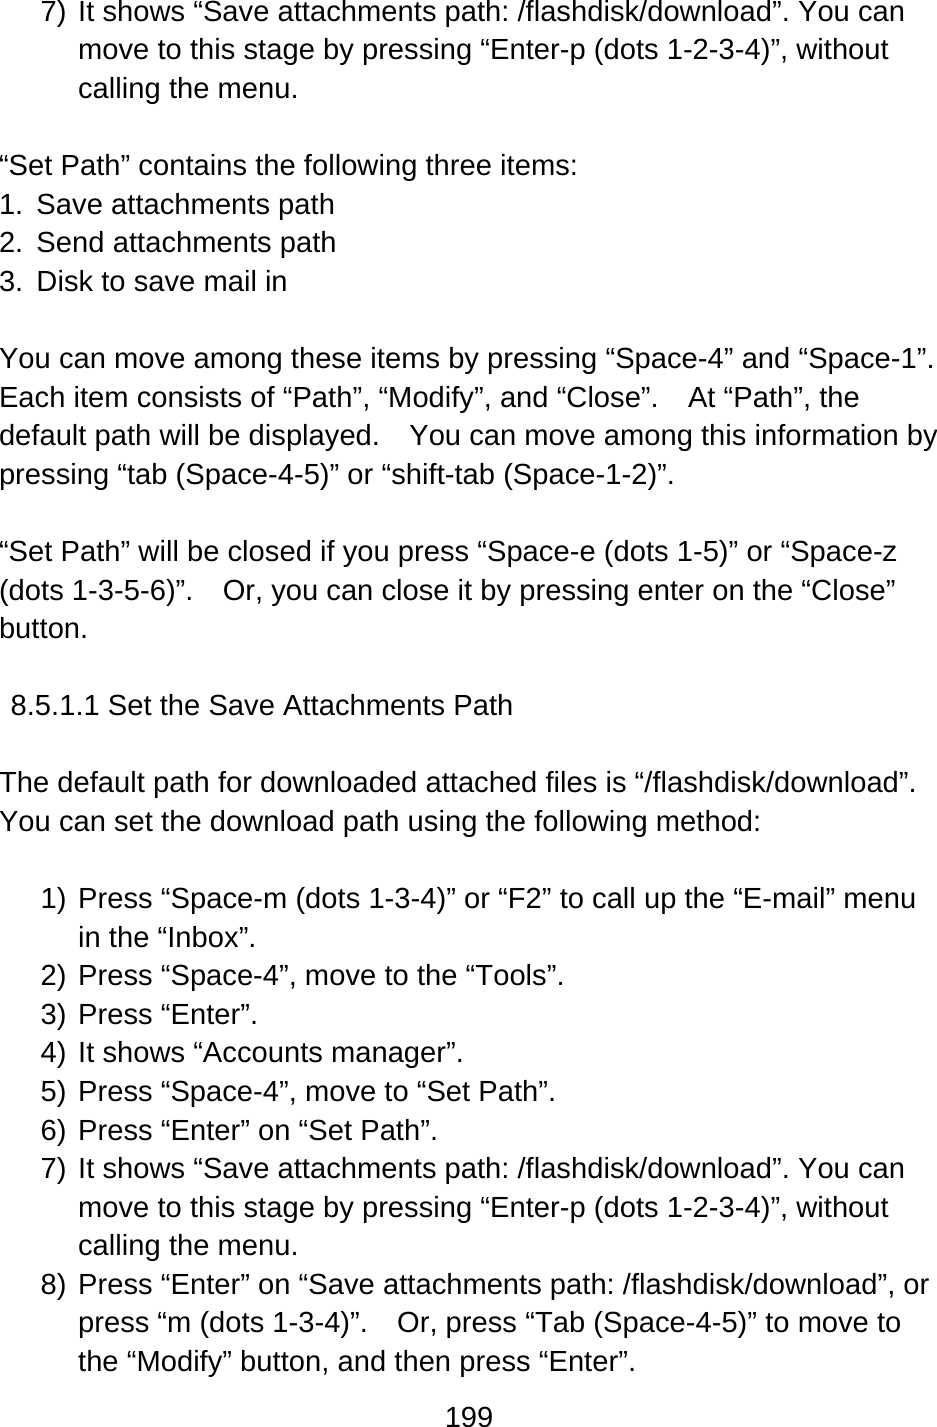 199  7) It shows “Save attachments path: /flashdisk/download”. You can move to this stage by pressing “Enter-p (dots 1-2-3-4)”, without calling the menu.  “Set Path” contains the following three items: 1. Save attachments path 2. Send attachments path 3.  Disk to save mail in  You can move among these items by pressing “Space-4” and “Space-1”.   Each item consists of “Path”, “Modify”, and “Close”.    At “Path”, the default path will be displayed.    You can move among this information by pressing “tab (Space-4-5)” or “shift-tab (Space-1-2)”.  “Set Path” will be closed if you press “Space-e (dots 1-5)” or “Space-z (dots 1-3-5-6)”.    Or, you can close it by pressing enter on the “Close” button.  8.5.1.1 Set the Save Attachments Path  The default path for downloaded attached files is “/flashdisk/download”.     You can set the download path using the following method:  1) Press “Space-m (dots 1-3-4)” or “F2” to call up the “E-mail” menu in the “Inbox”. 2) Press “Space-4”, move to the “Tools”. 3) Press “Enter”.  4) It shows “Accounts manager”. 5) Press “Space-4”, move to “Set Path”. 6) Press “Enter” on “Set Path”.     7) It shows “Save attachments path: /flashdisk/download”. You can move to this stage by pressing “Enter-p (dots 1-2-3-4)”, without calling the menu. 8) Press “Enter” on “Save attachments path: /flashdisk/download”, or press “m (dots 1-3-4)”.    Or, press “Tab (Space-4-5)” to move to the “Modify” button, and then press “Enter”. 